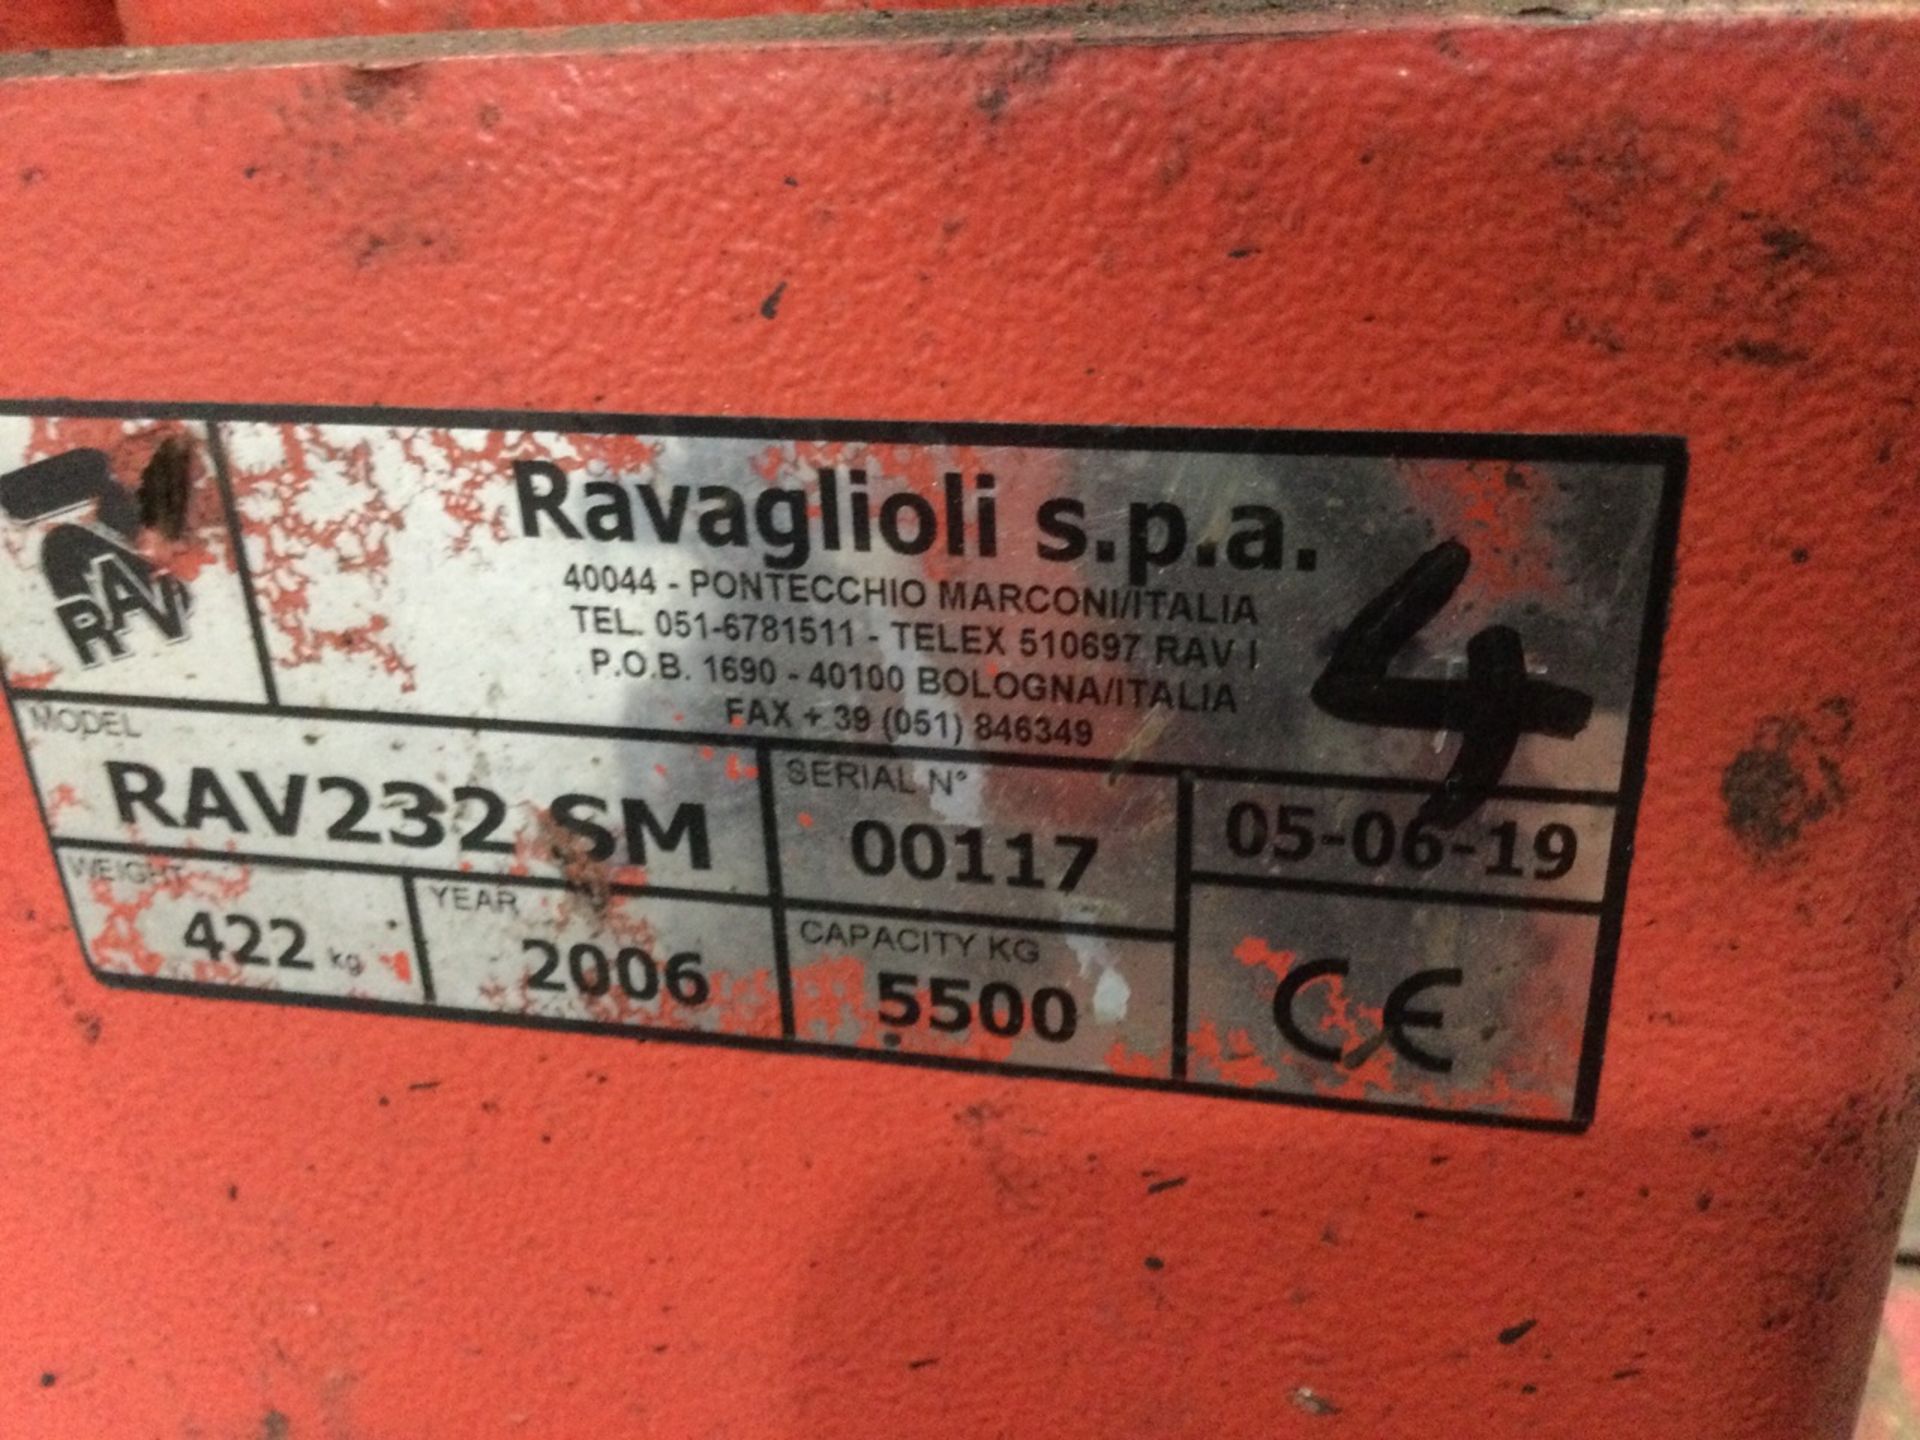 Somers/Ravaglioli RAV232 SM Mobile Cable Connected Vehicle Stands, Each 5500kg Capacity, serial numb - Bild 5 aus 6